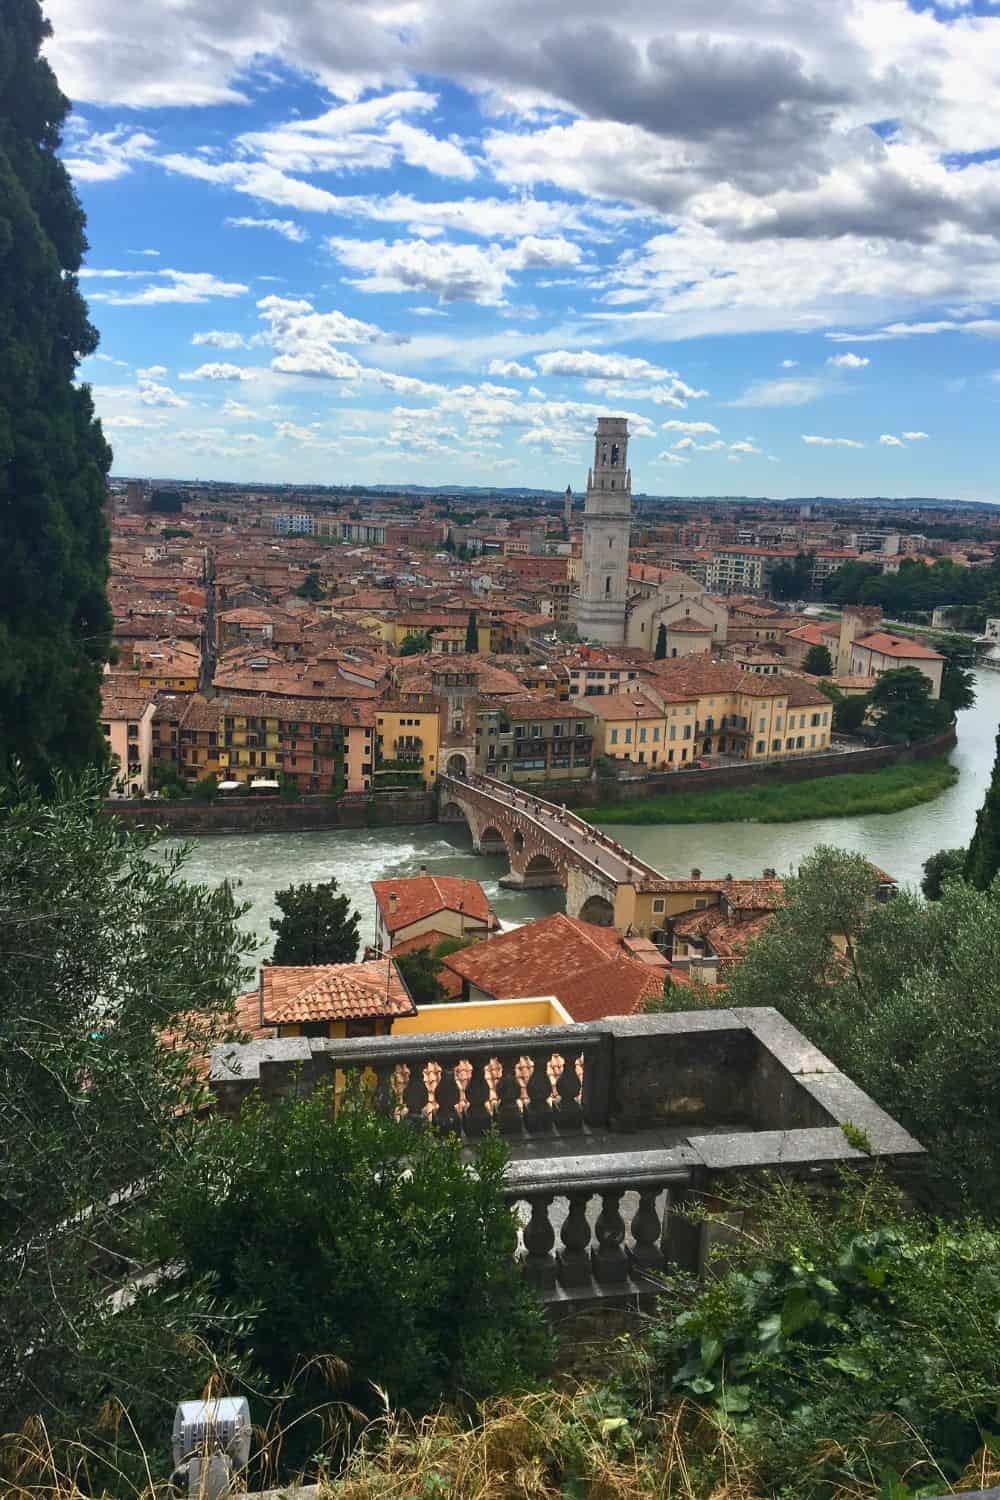 An overview picture of the city of Verona. You can see the buildings and river that runs through the city.